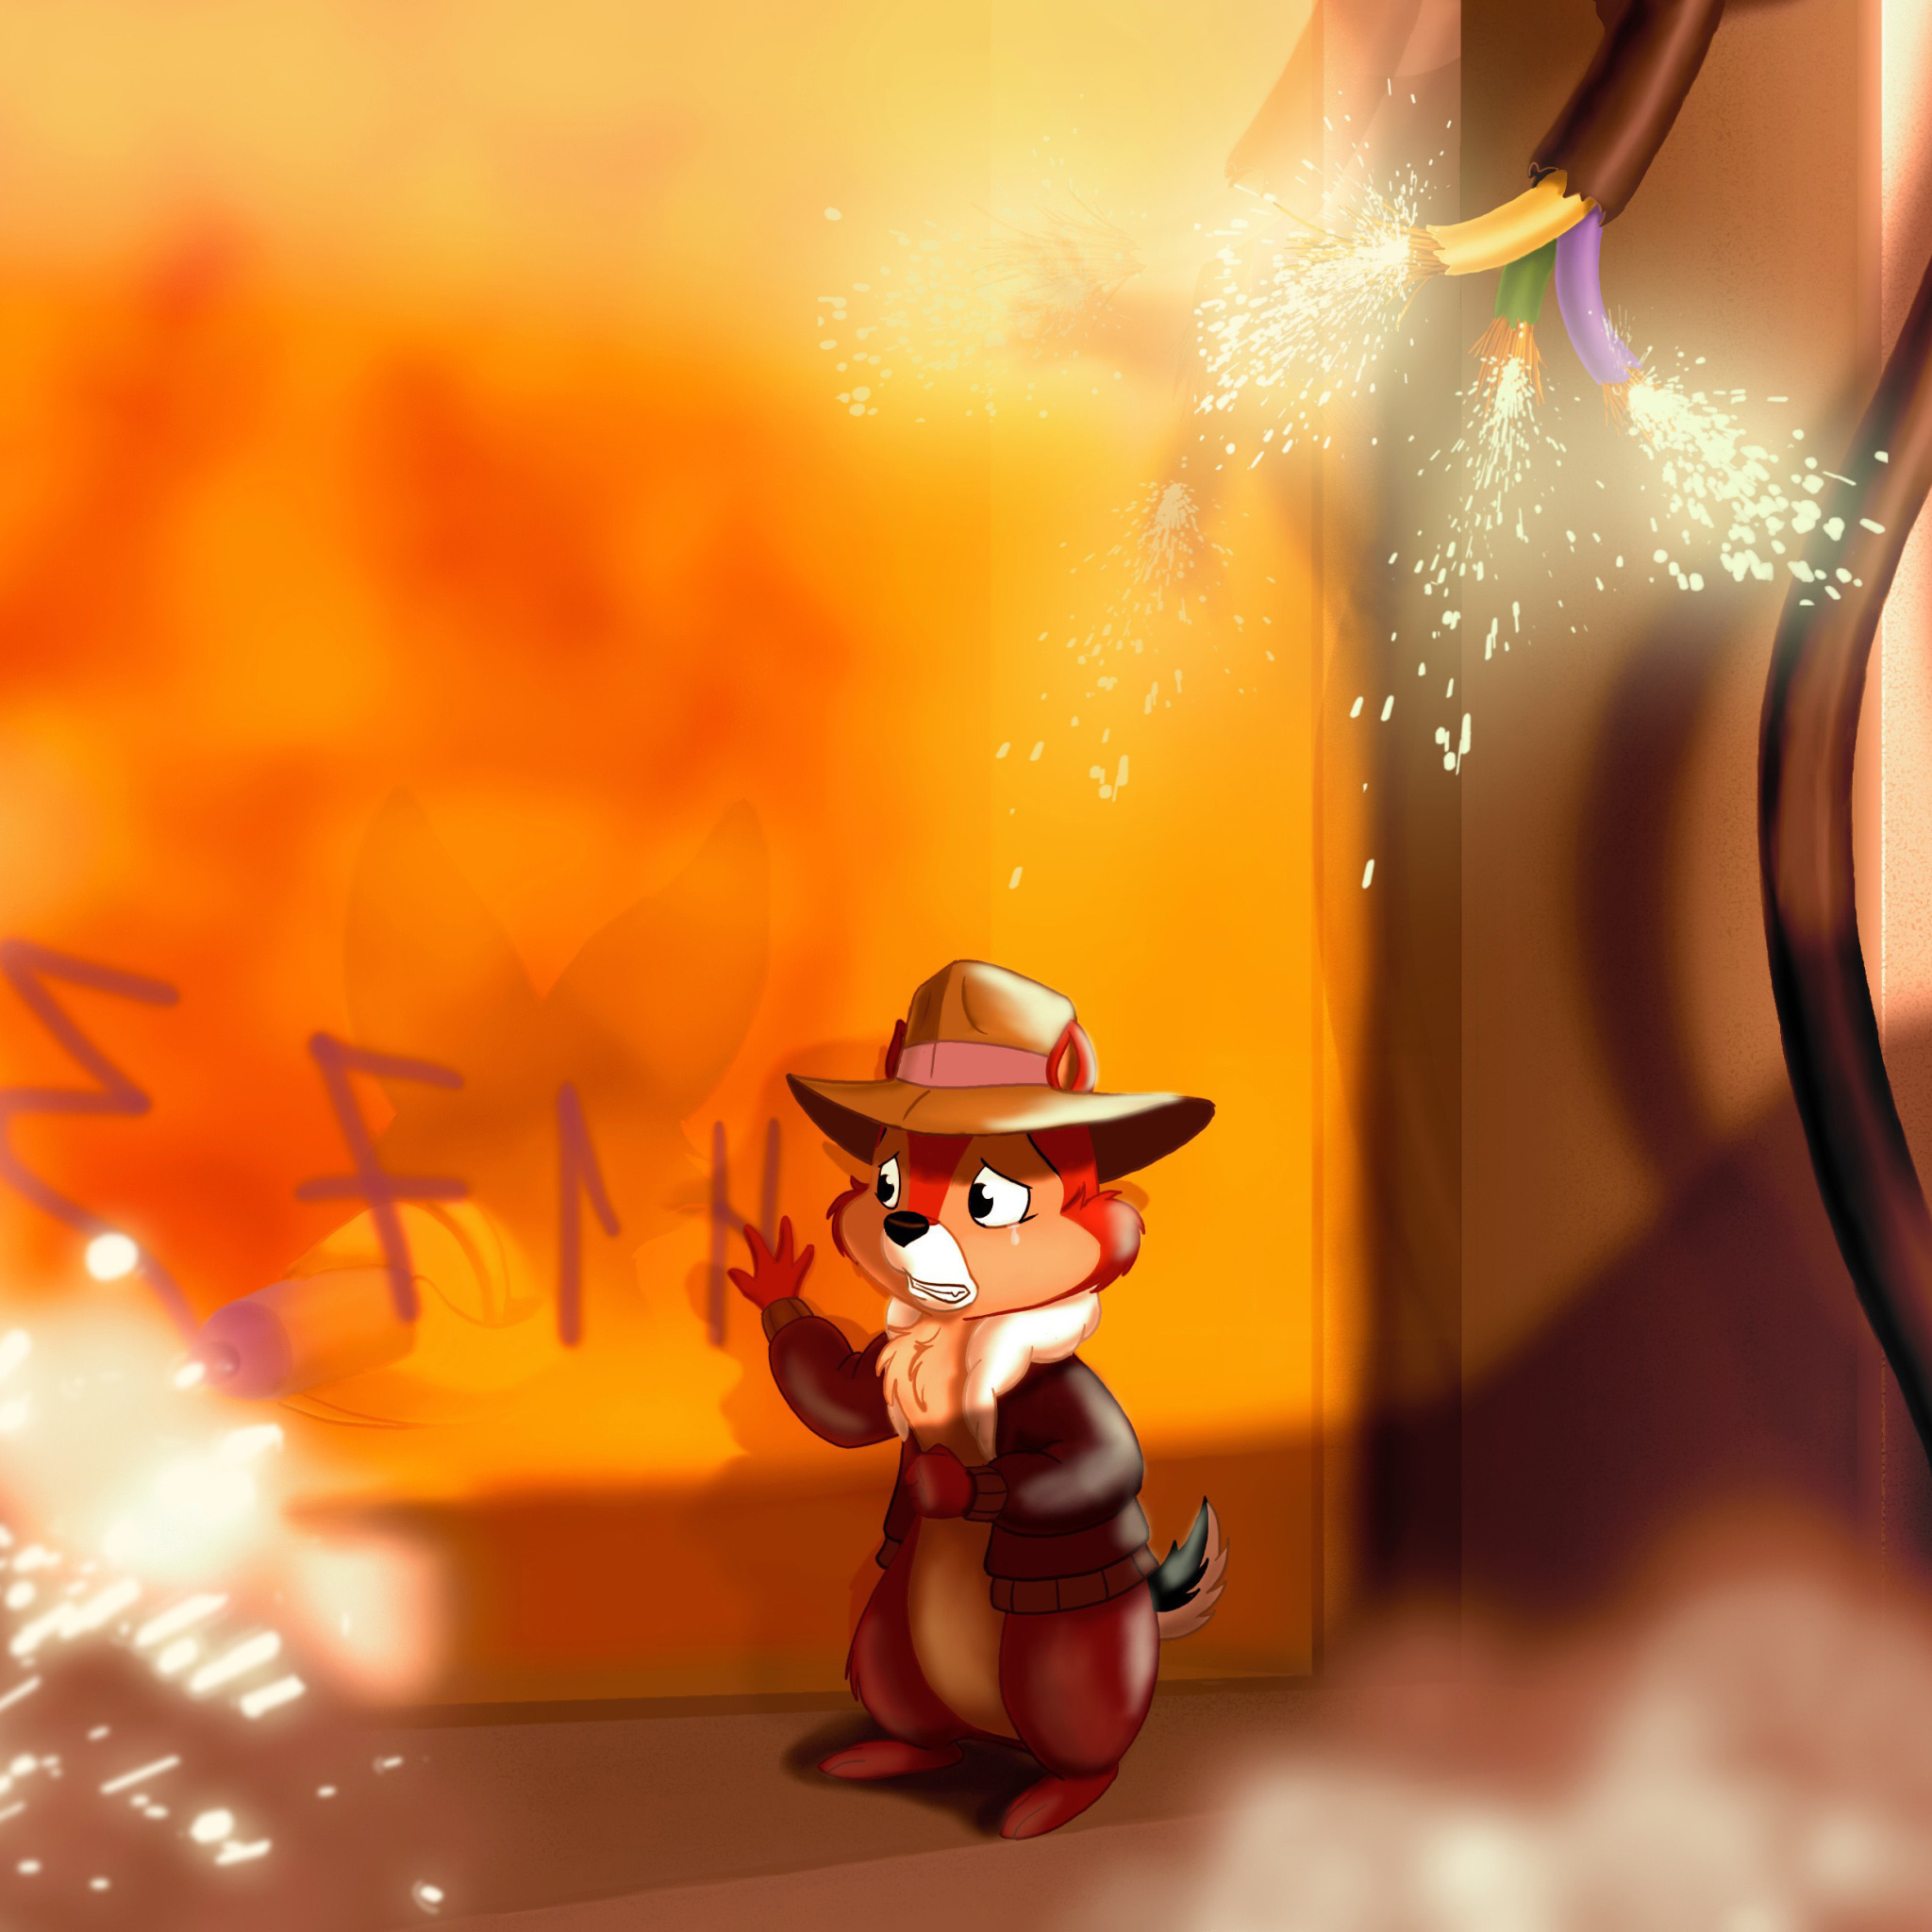 Chip and Dale Rescue Rangers 2 wallpaper 2048x2048